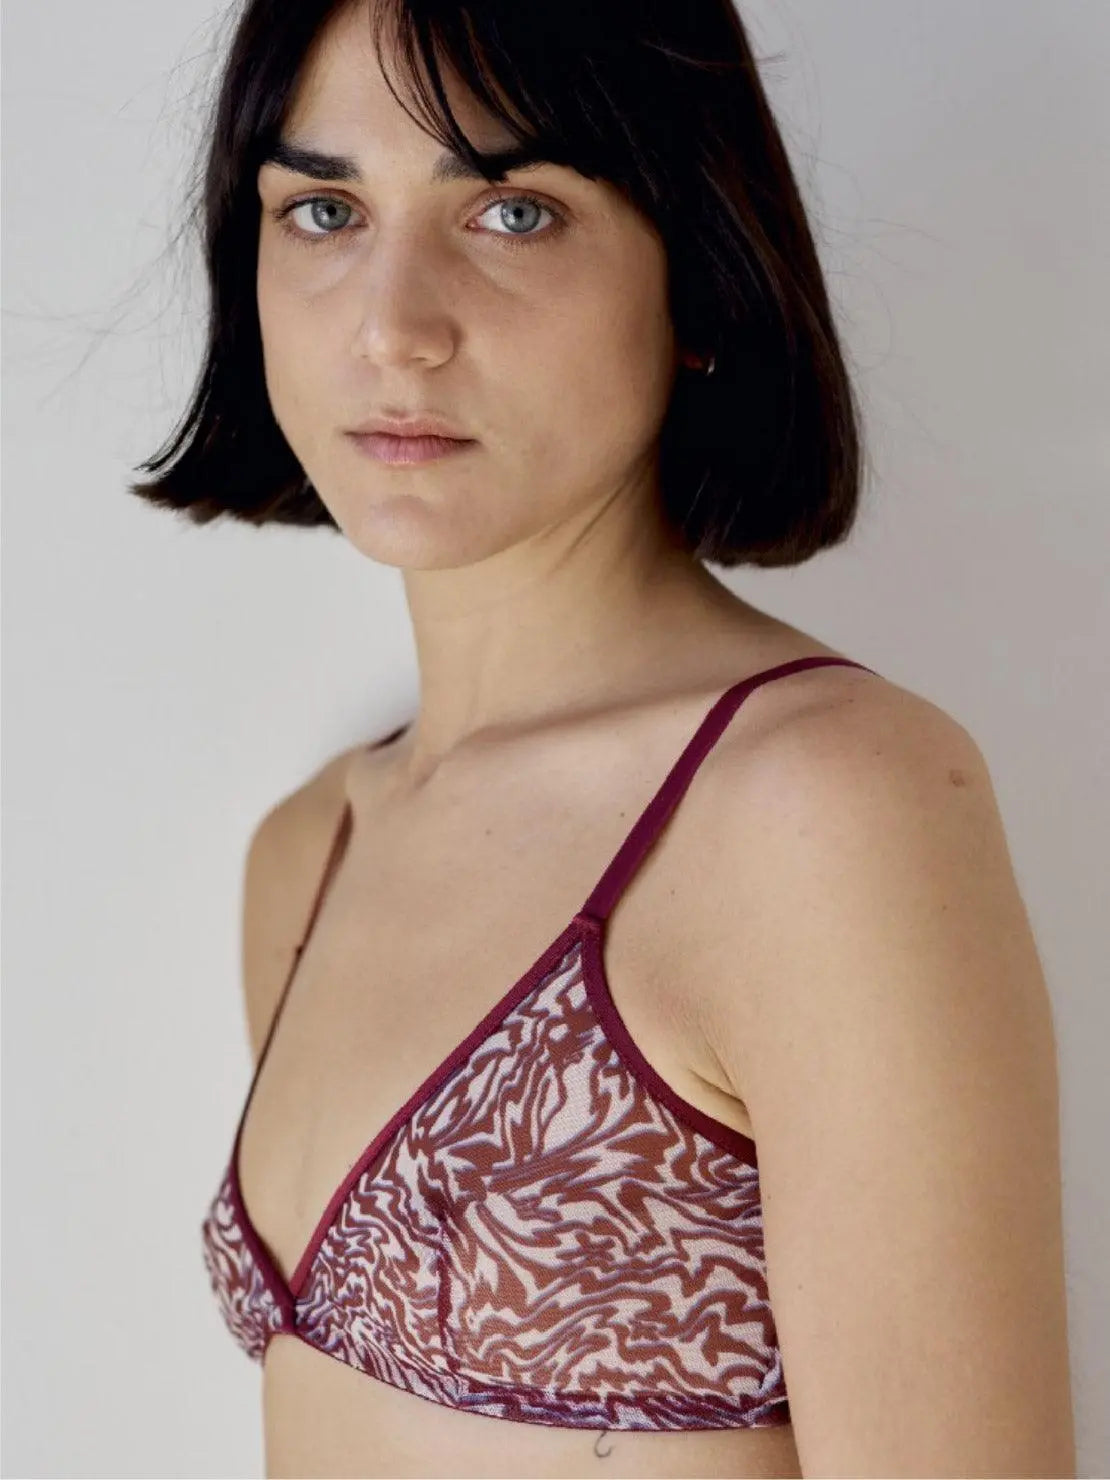 A woman with shoulder-length dark hair and bangs, wearing a patterned Triangle Bra with thin straps, looks into the camera with a neutral expression. The bra, showcasing a red and white intricate design from Interiors in Barcelona, stands out against the plain, light-colored background.